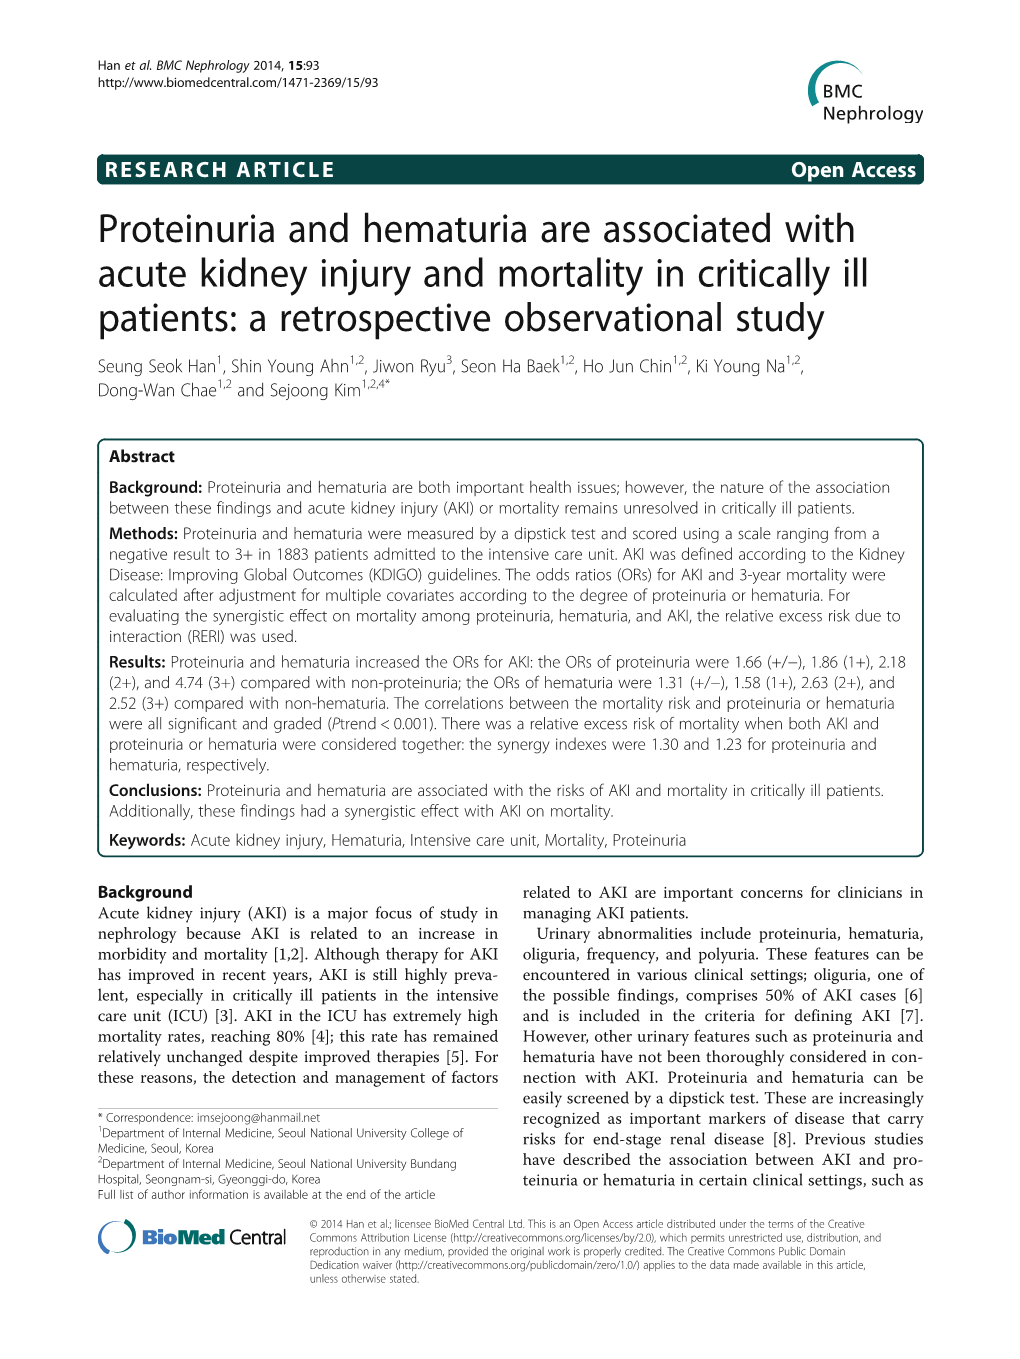 Proteinuria and Hematuria Are Associated with Acute Kidney Injury and Mortality in Critically Ill Patients